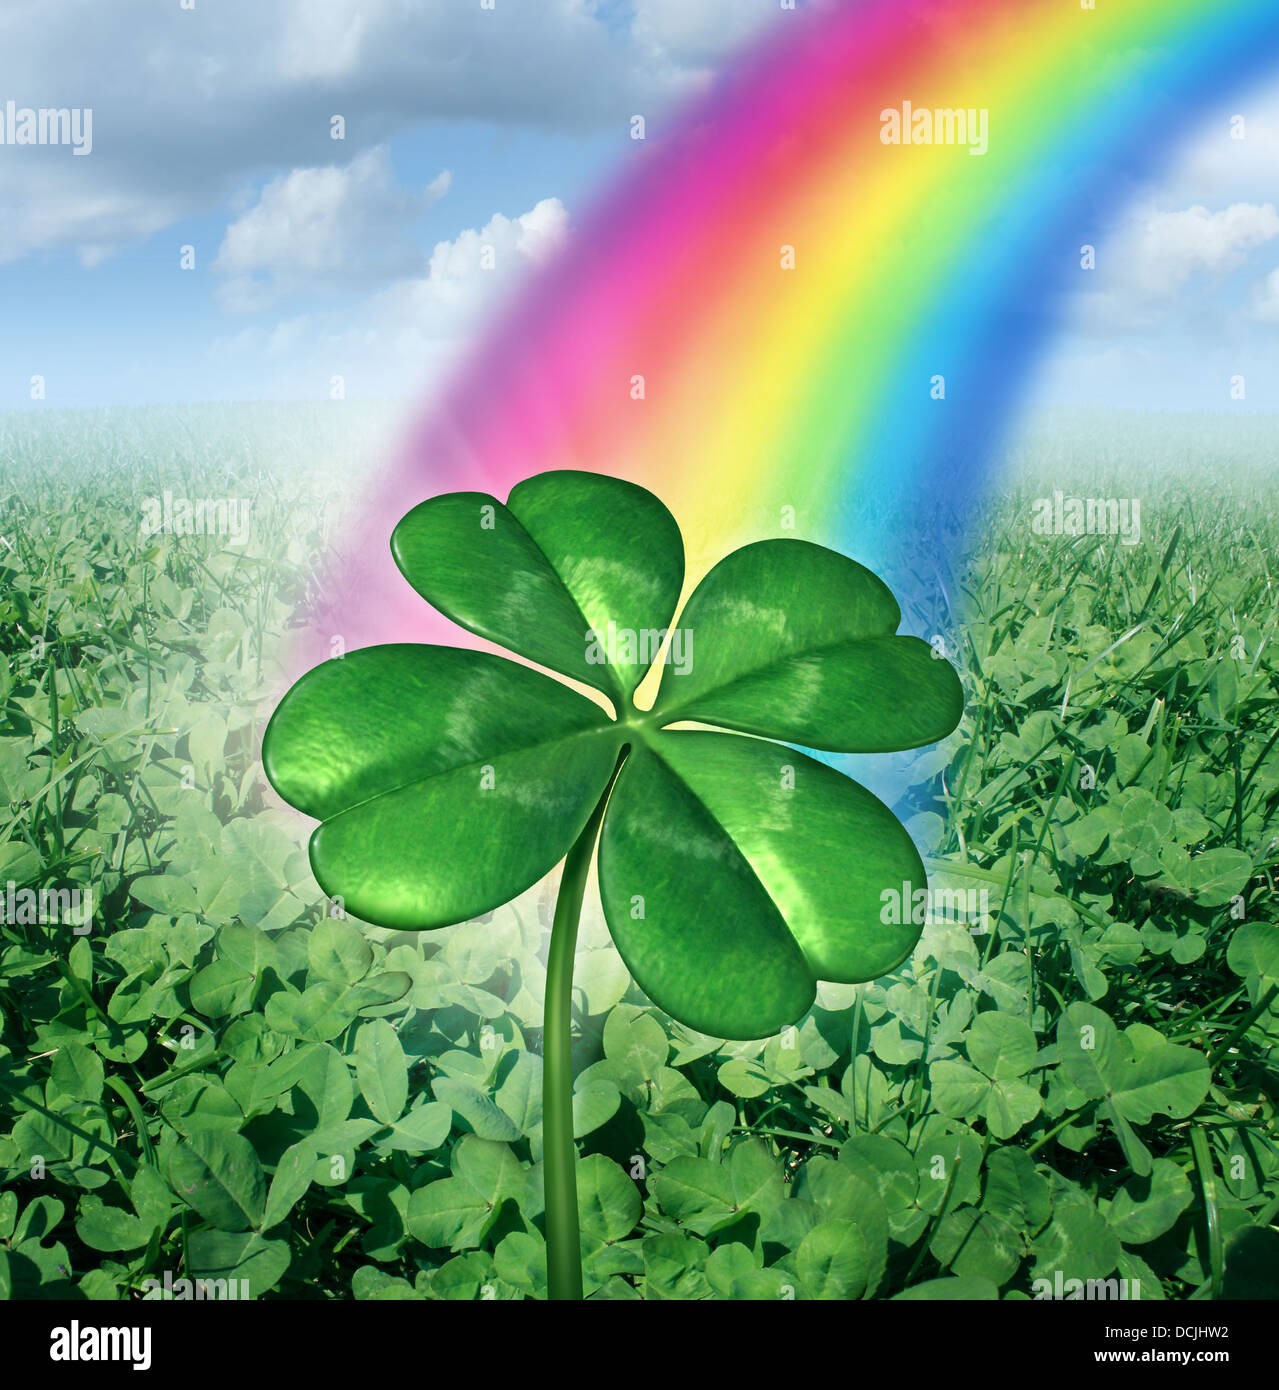 Luck concept with a four leaf clover over a field of green clovers with a rainbow from the sky shinning down as a symbol of good fortune and prosperity as a metaphore for success and opportunity. Stock Photo